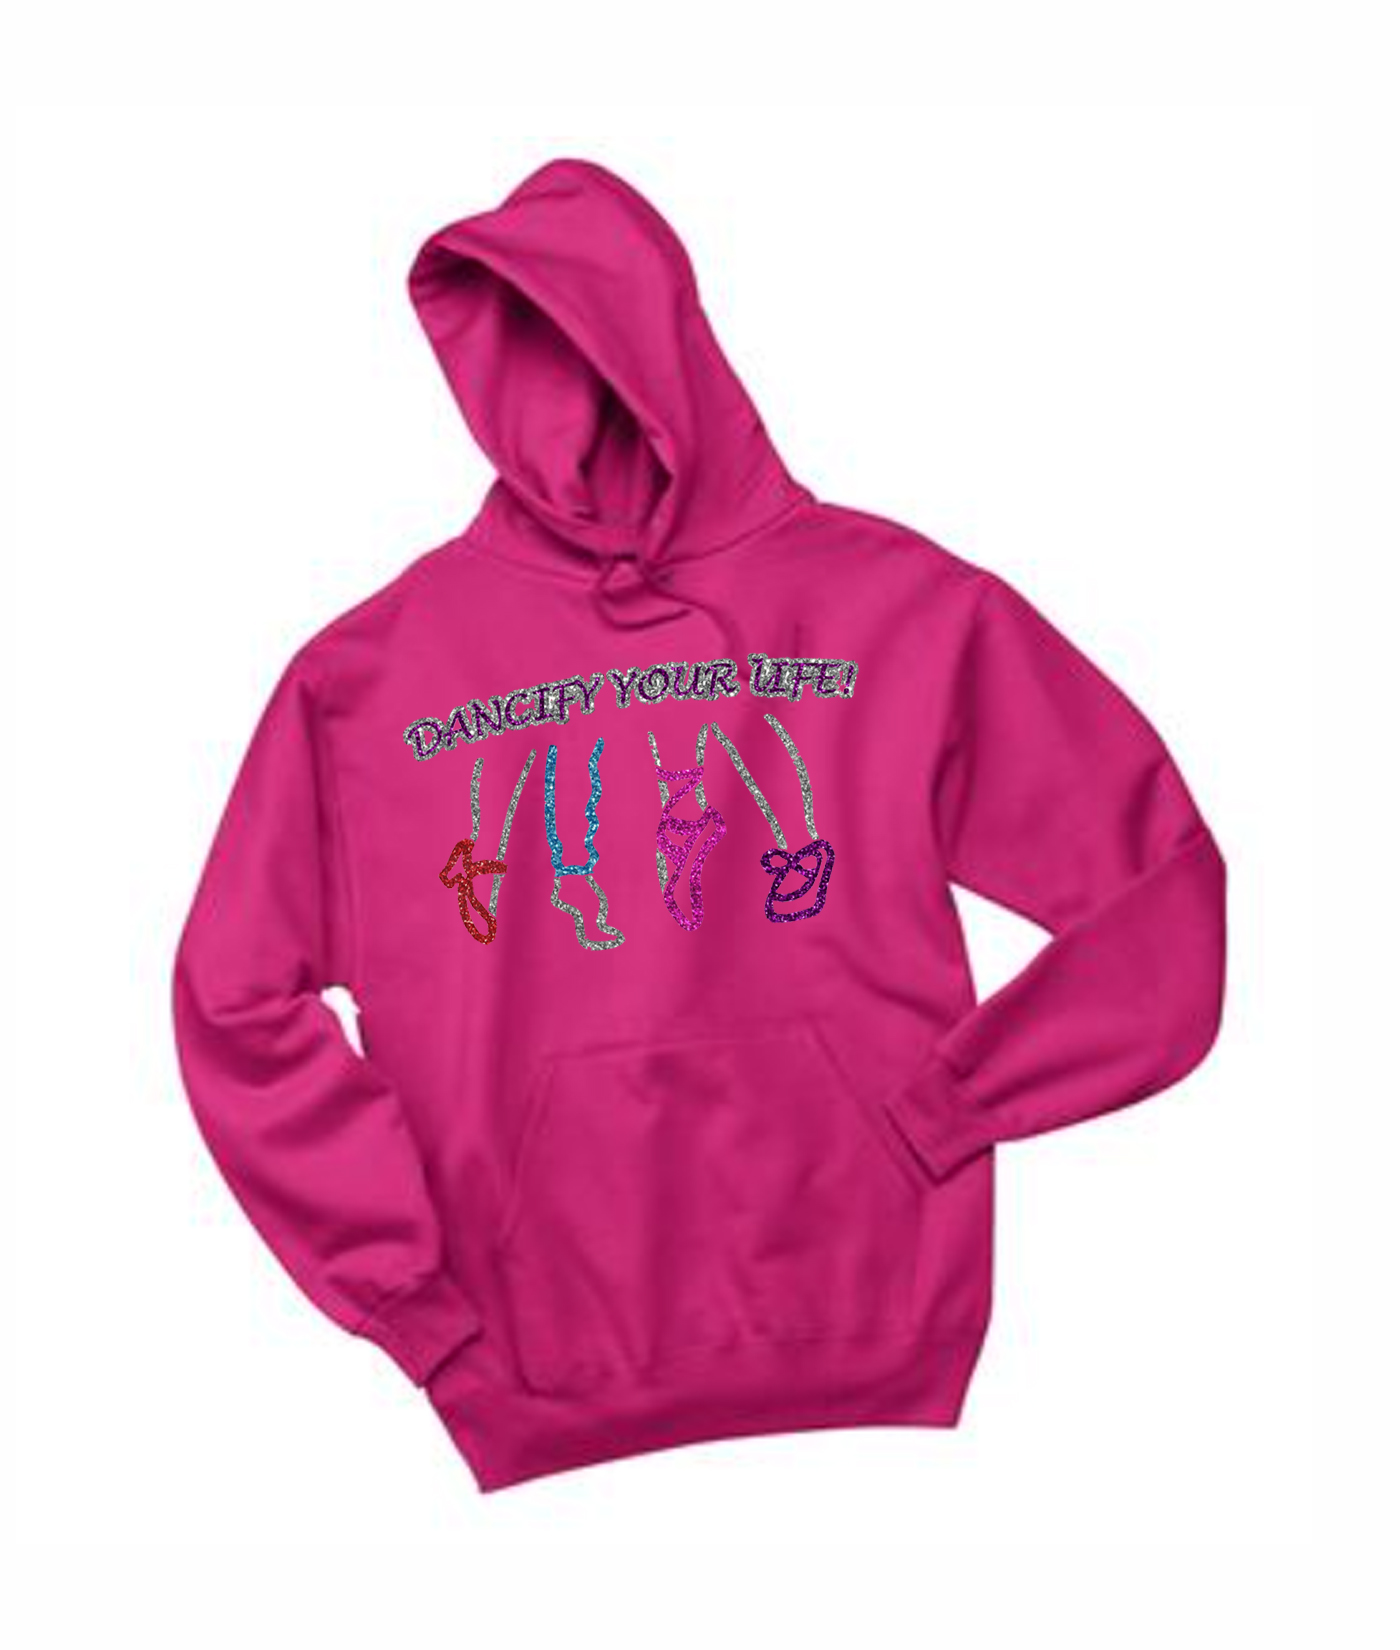 Jerzees Dancify Shoes Glitter Outlined Pink Hoodie